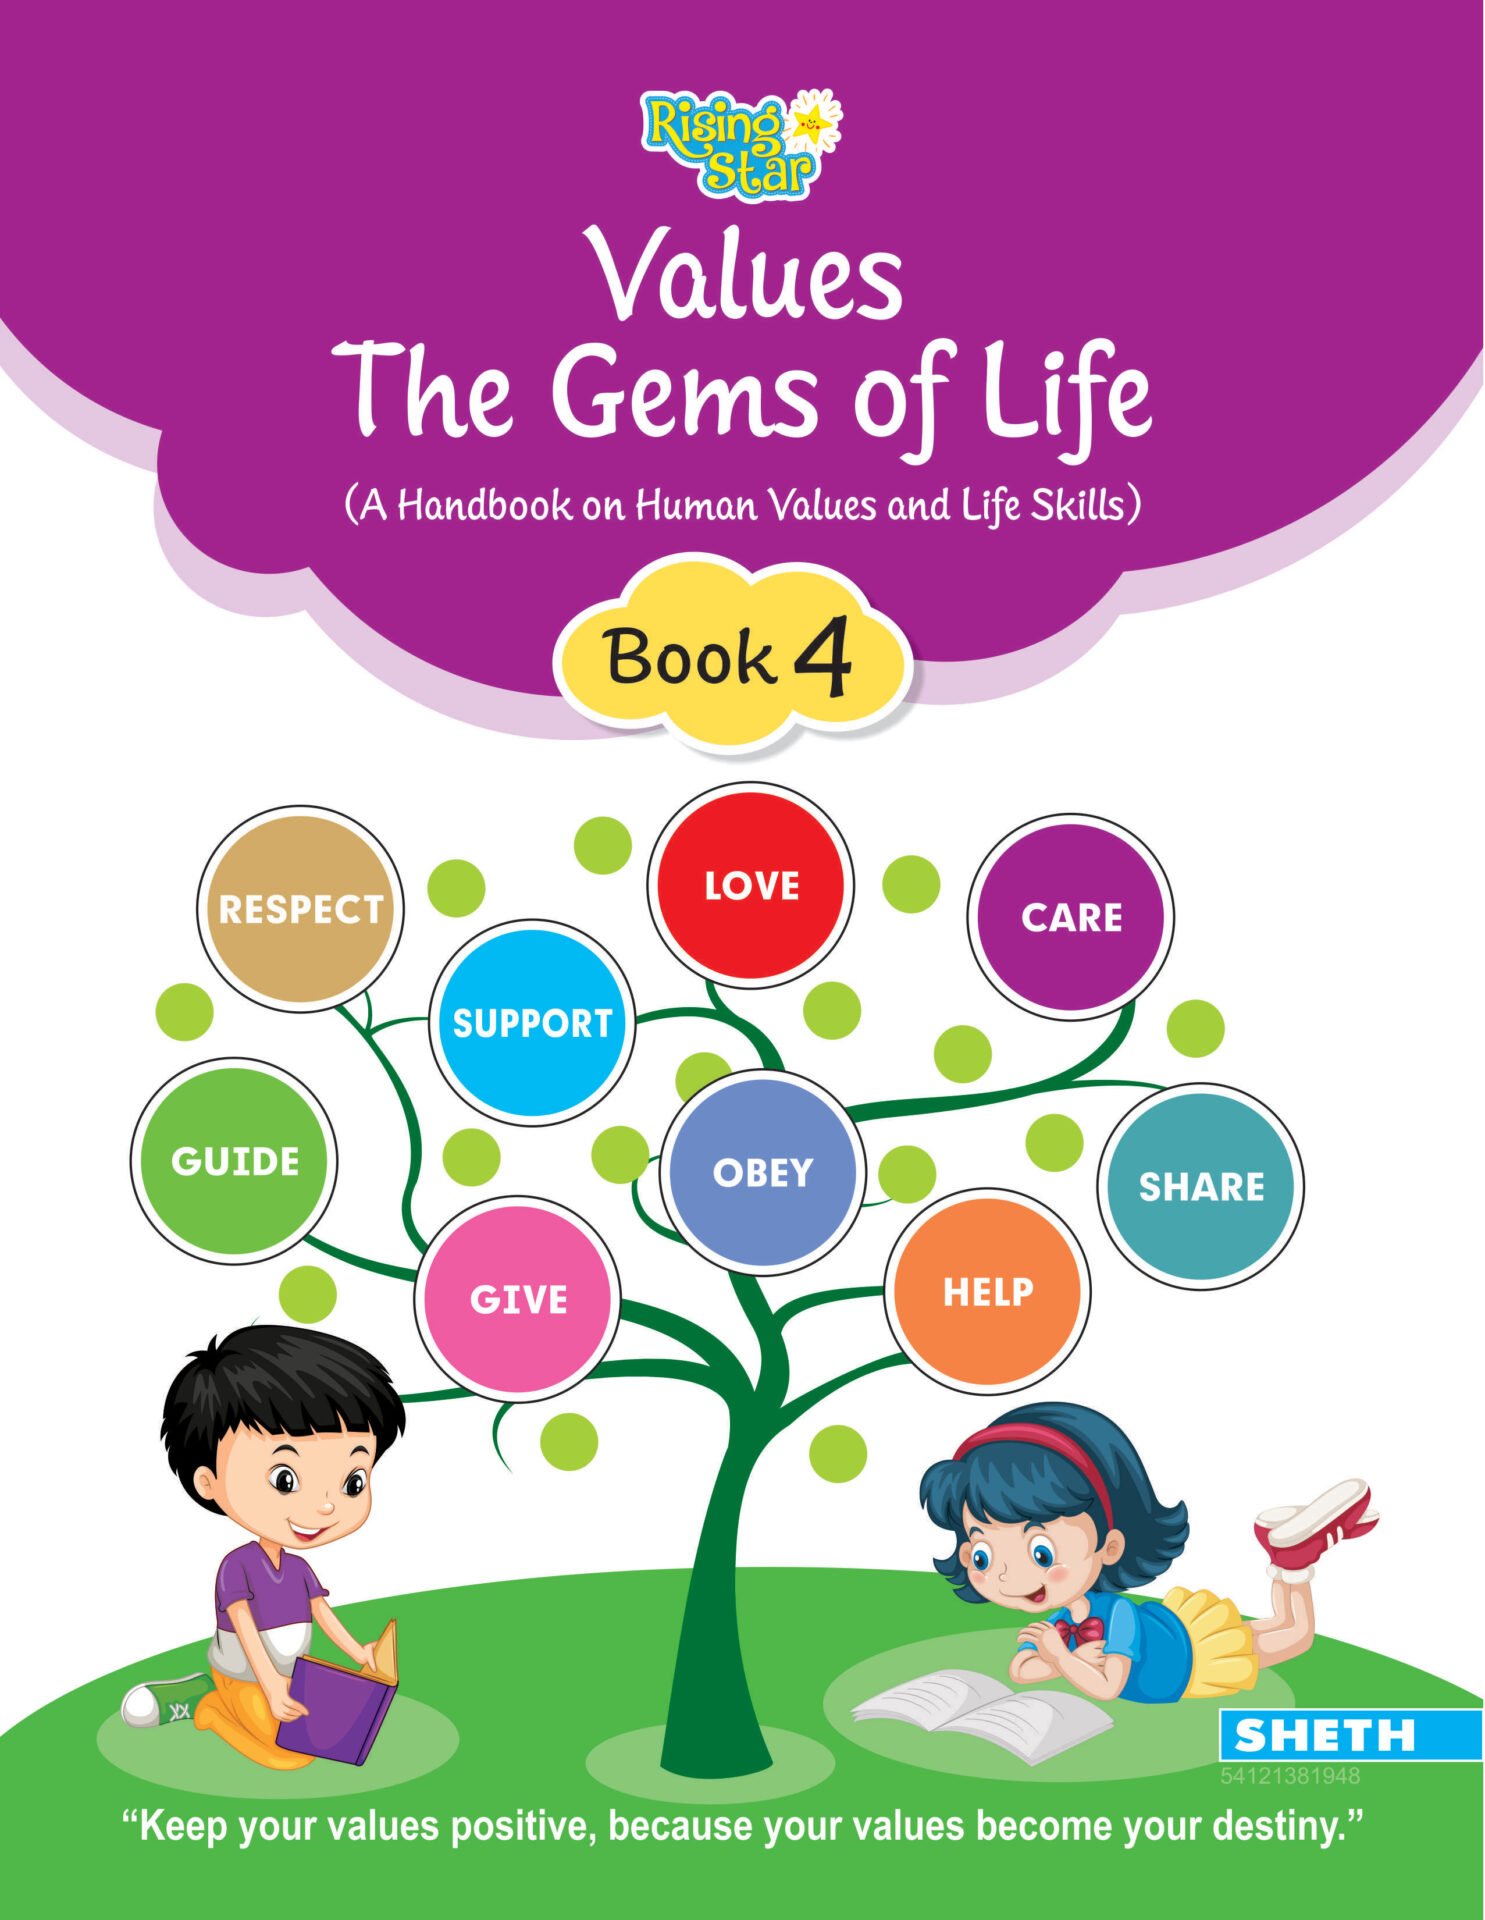 Rising Star Values The Gems of Life Book 4 1 1